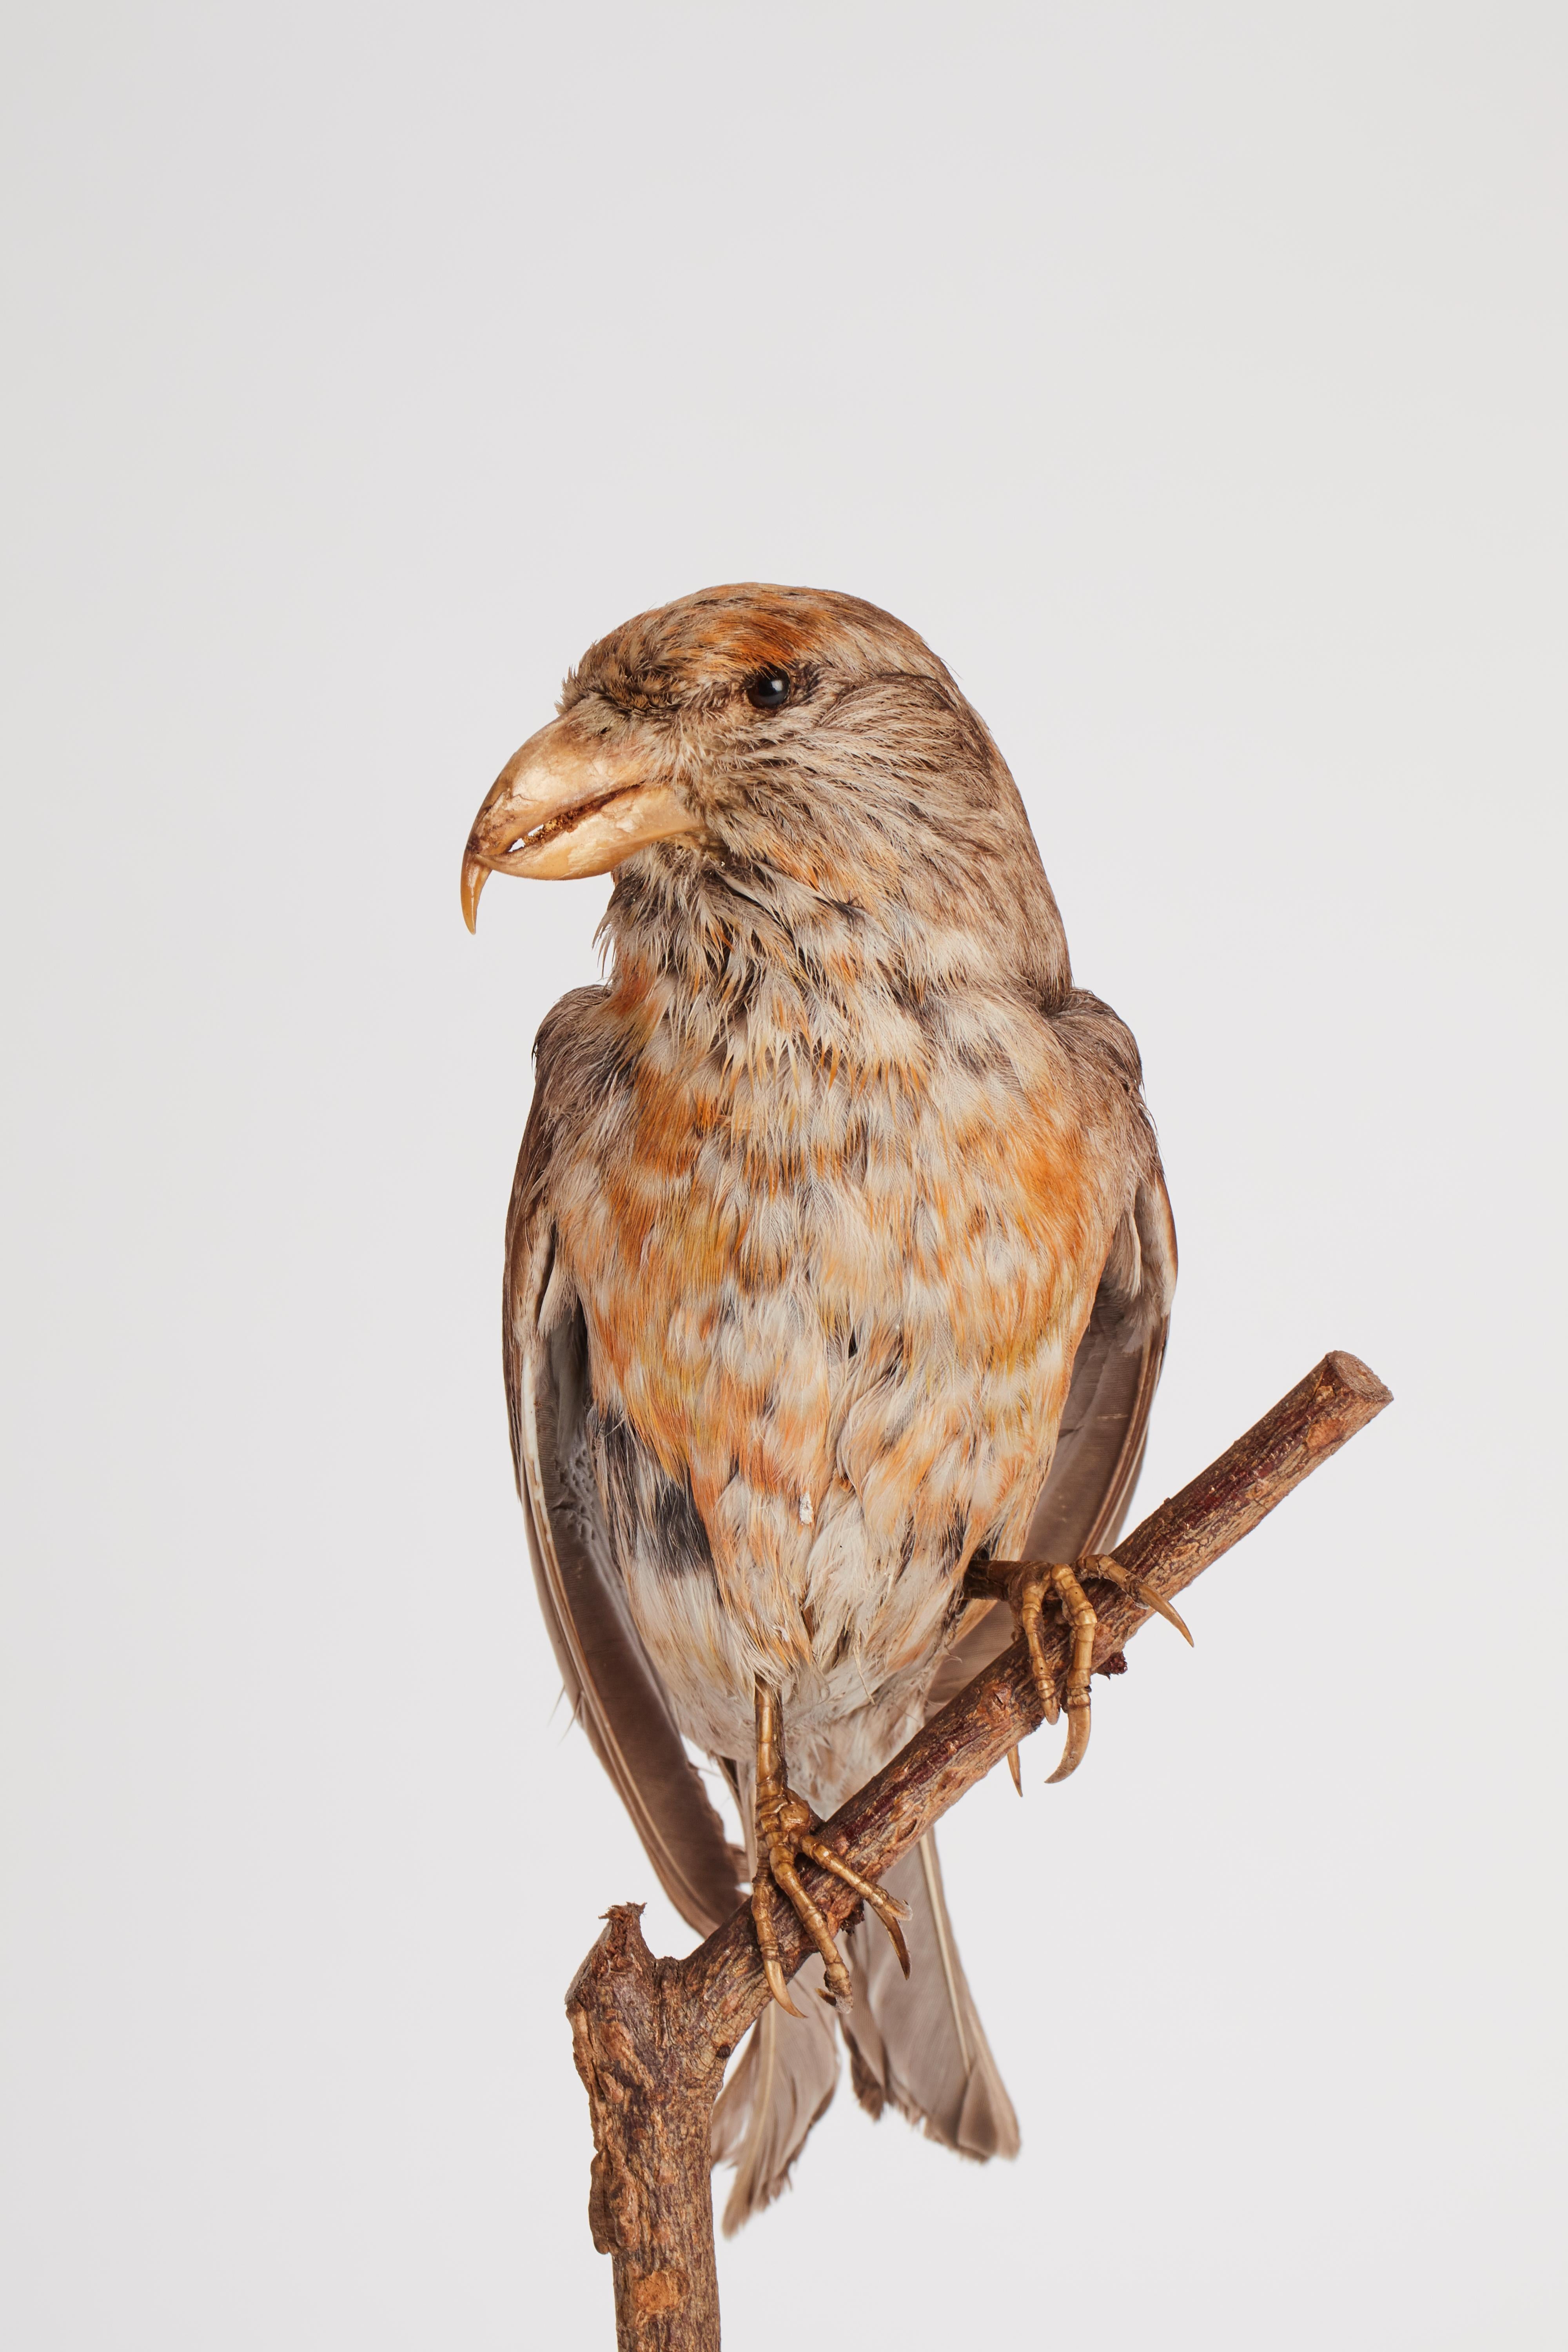 Natural specimen from Wunderkammer Stuffed bird (Passer domesticus) House sparrow mounted on a wooden base with cartouche Specimen for laboratory and Natural history cabinet. S. Brogi Naturalista. Siena, Italy 1880 ca.